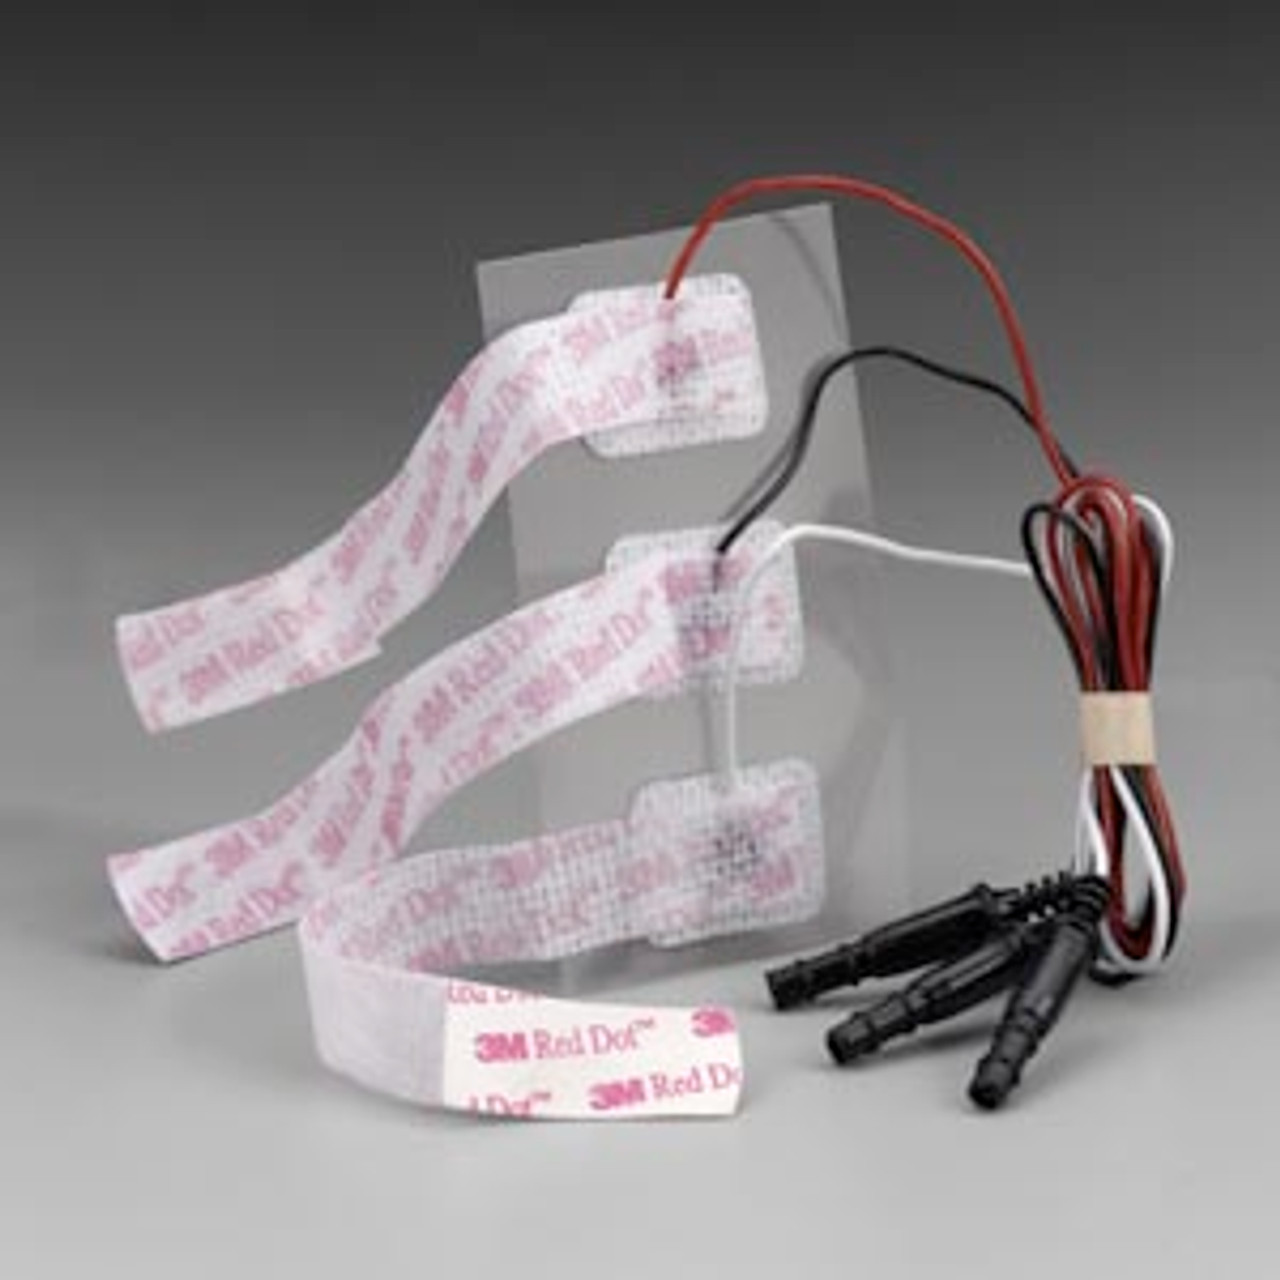 3M RED DOT ECG MONITORING ELECTRODES WITH PRE-ATTACHED LEAD WIRE, 2284